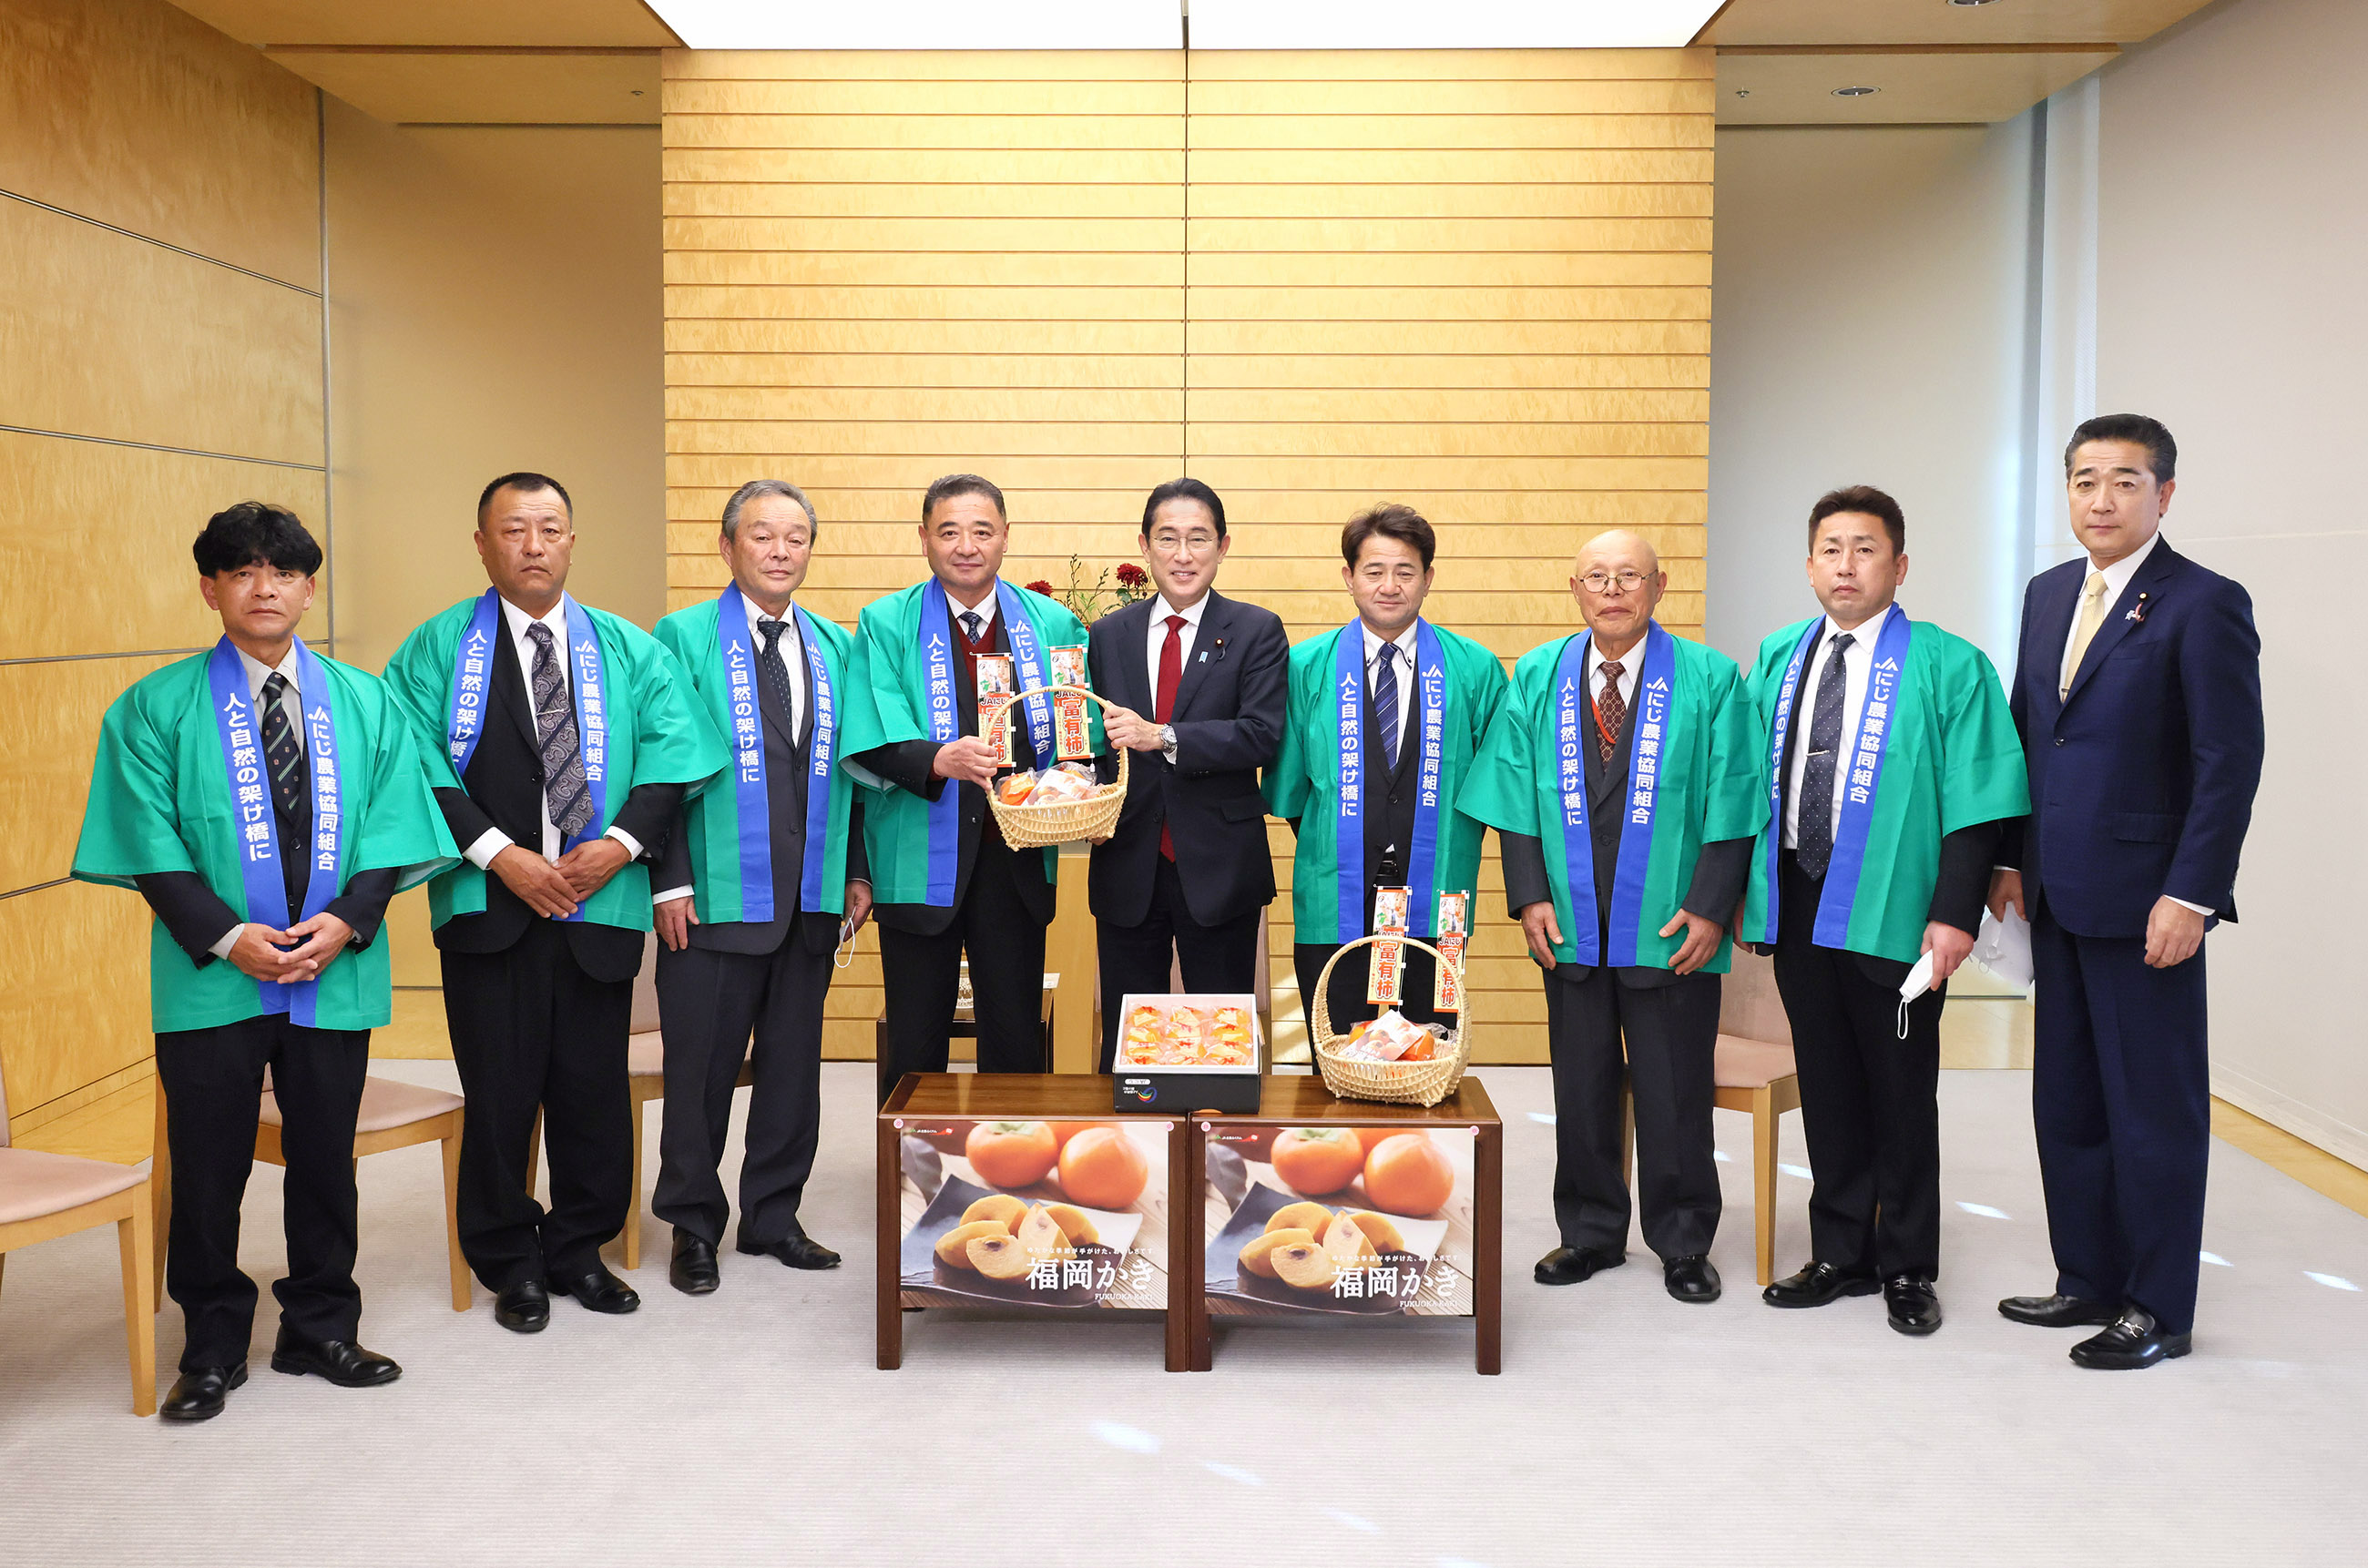 Prime Minister Kishida being presented with persimmons (1)